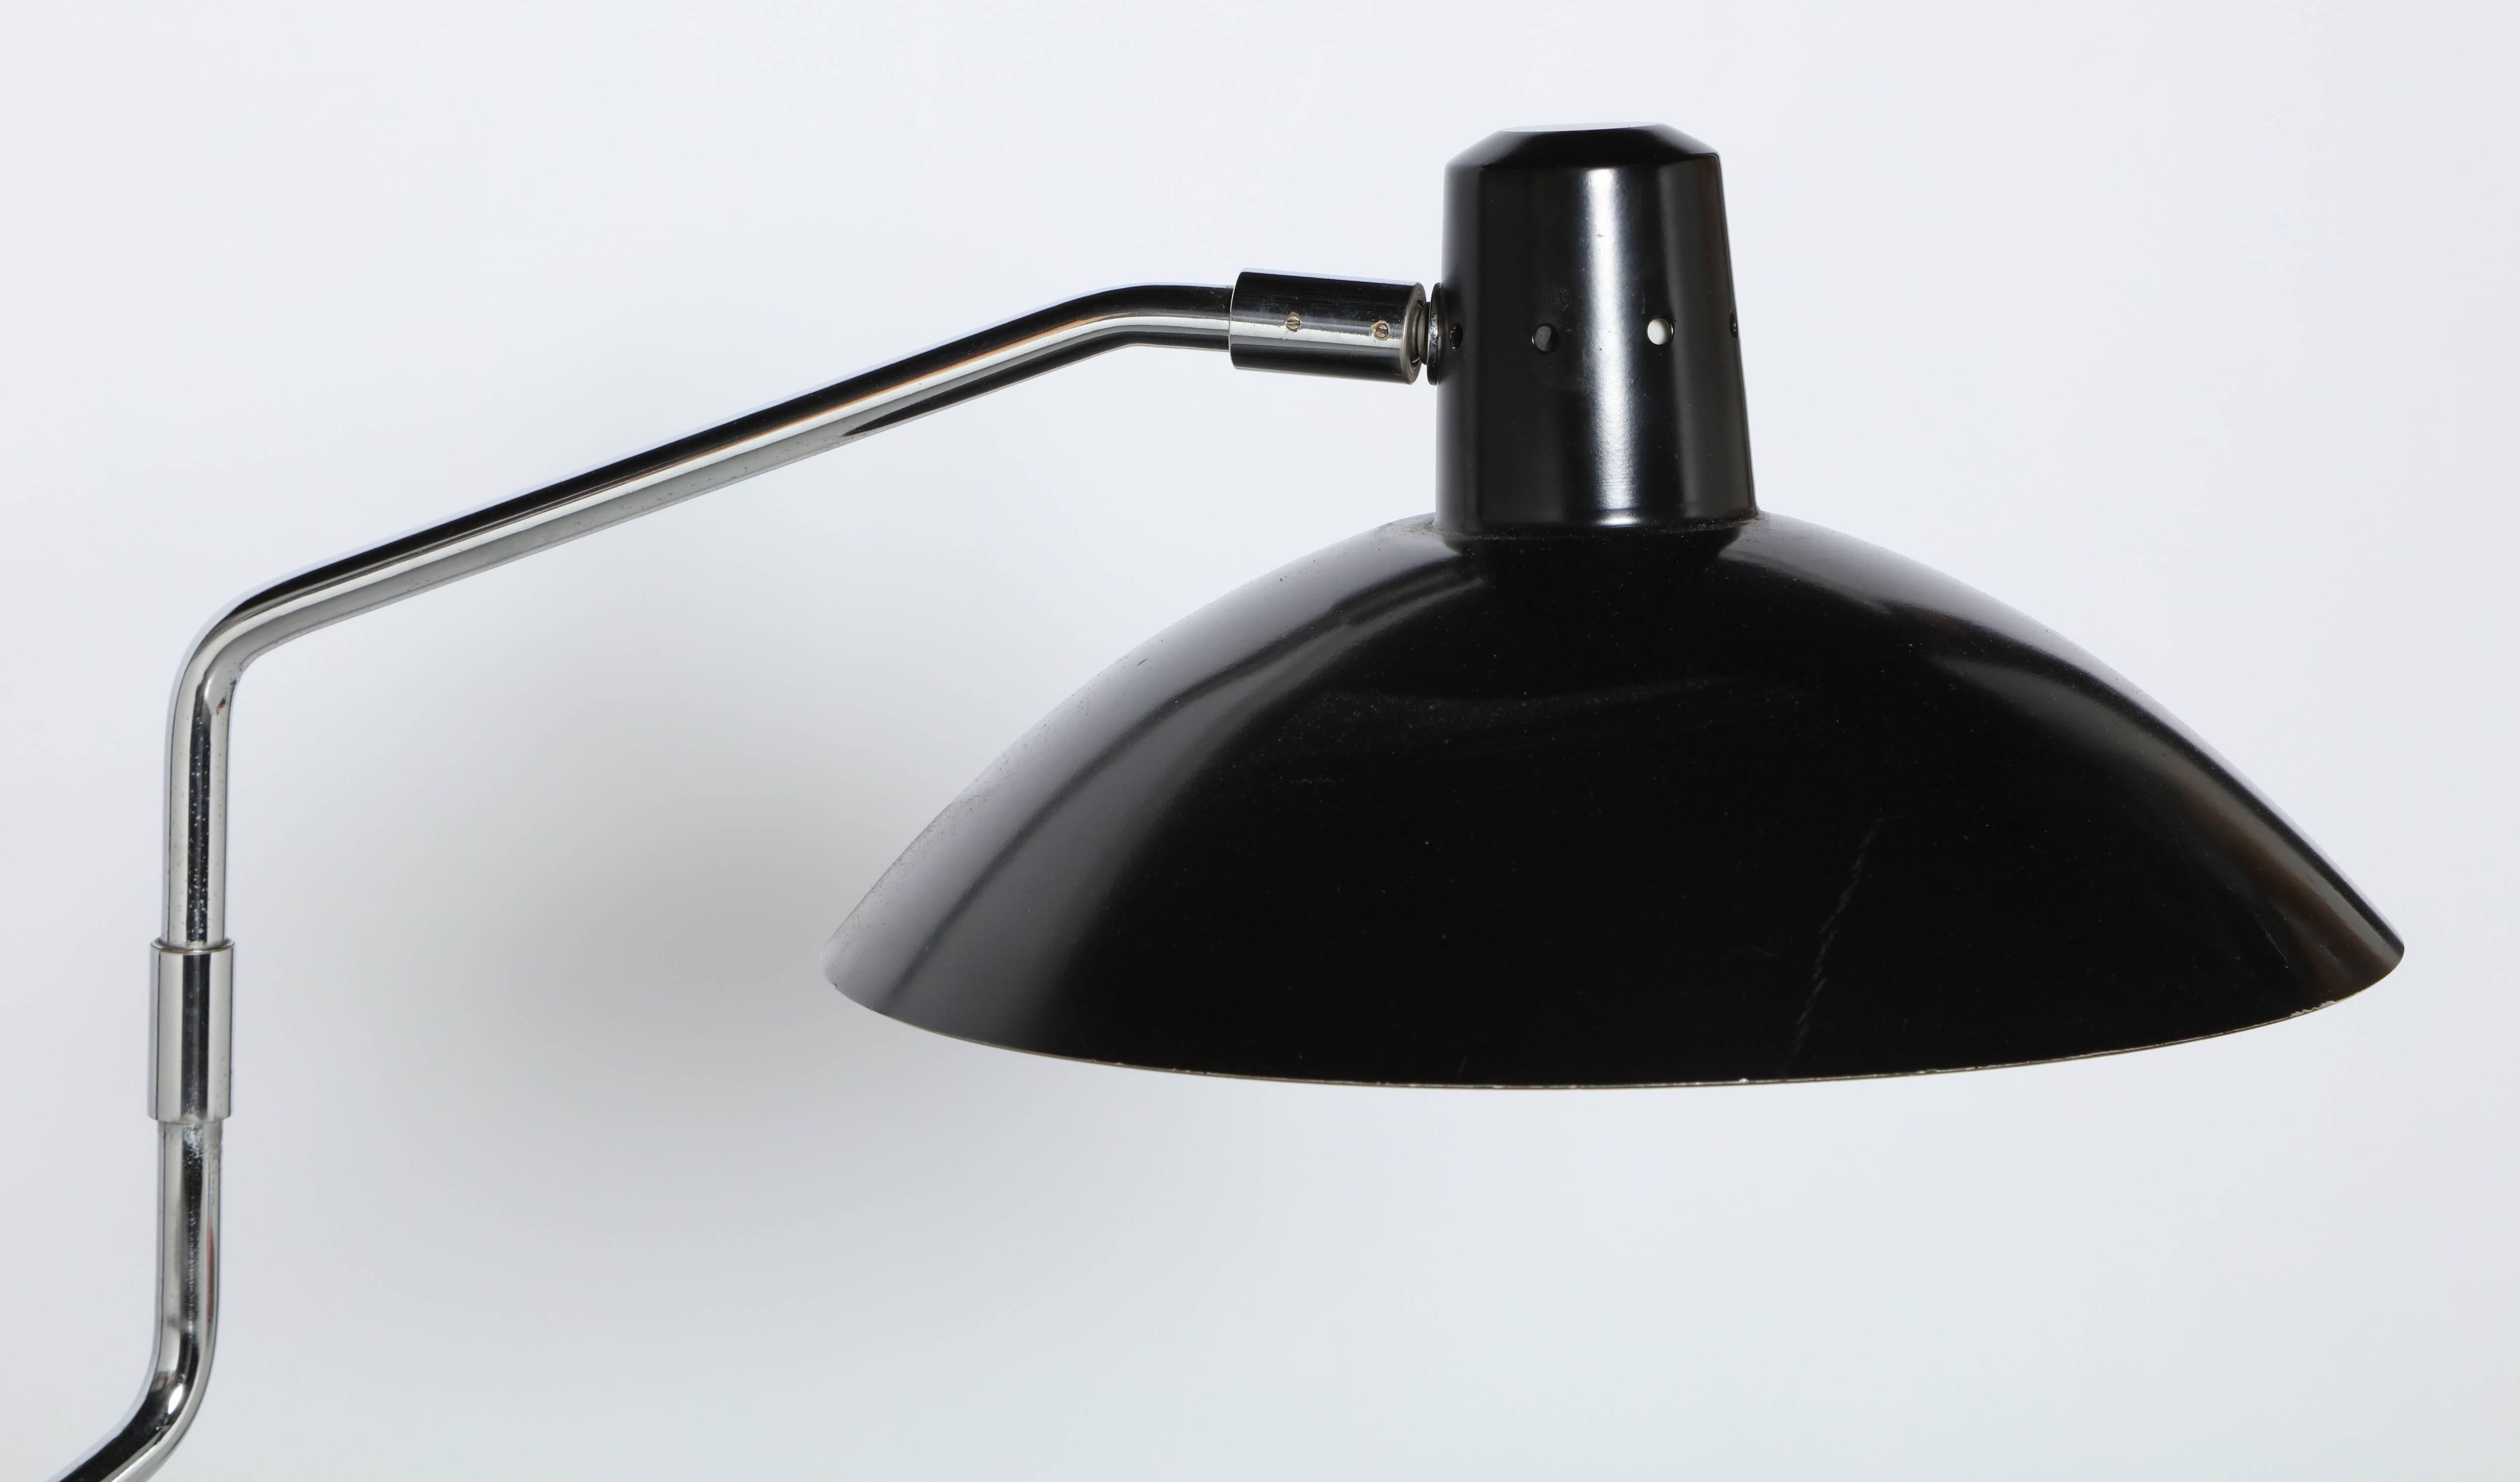 Enameled Clay Michie for Knoll No. 8 Swing Arm Chrome Desk Lamp with Black Shade